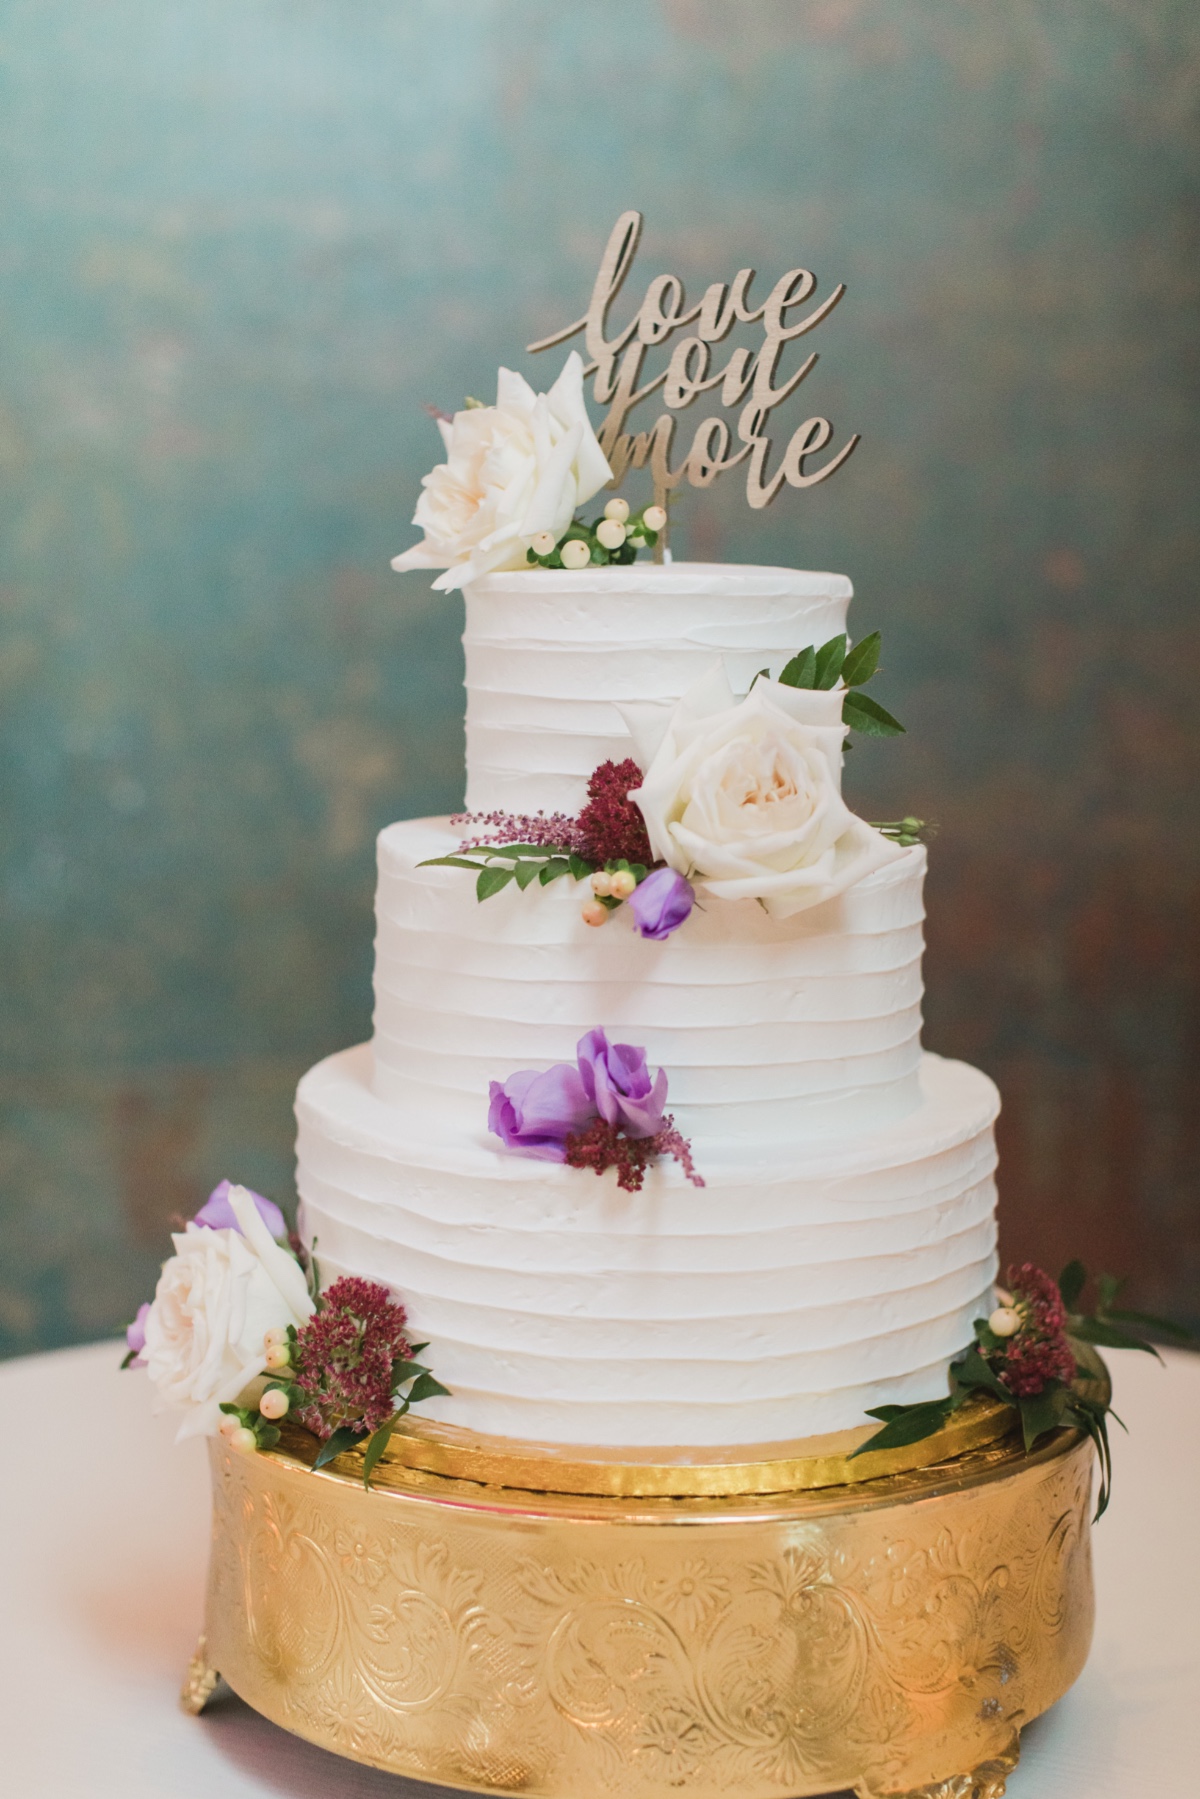 A Lilac-Filled Wedding Day Blooming With Lush Garden Inspiration